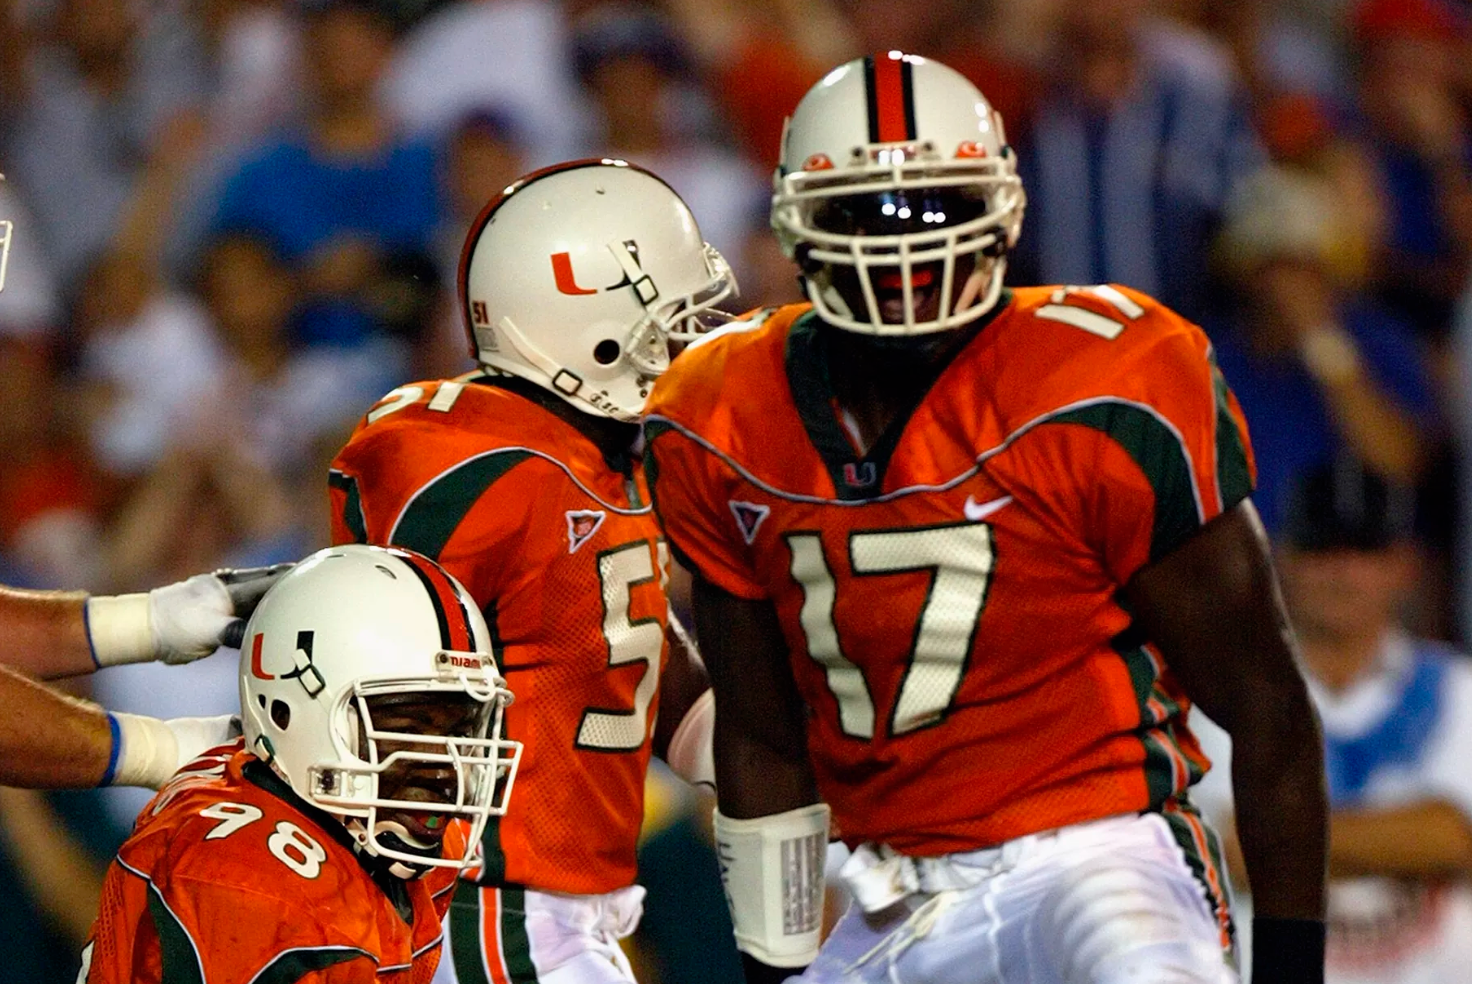 State Of The U: Interview With Dyme Lyfe Founder and Former Miami Hurricane D.J. Williams